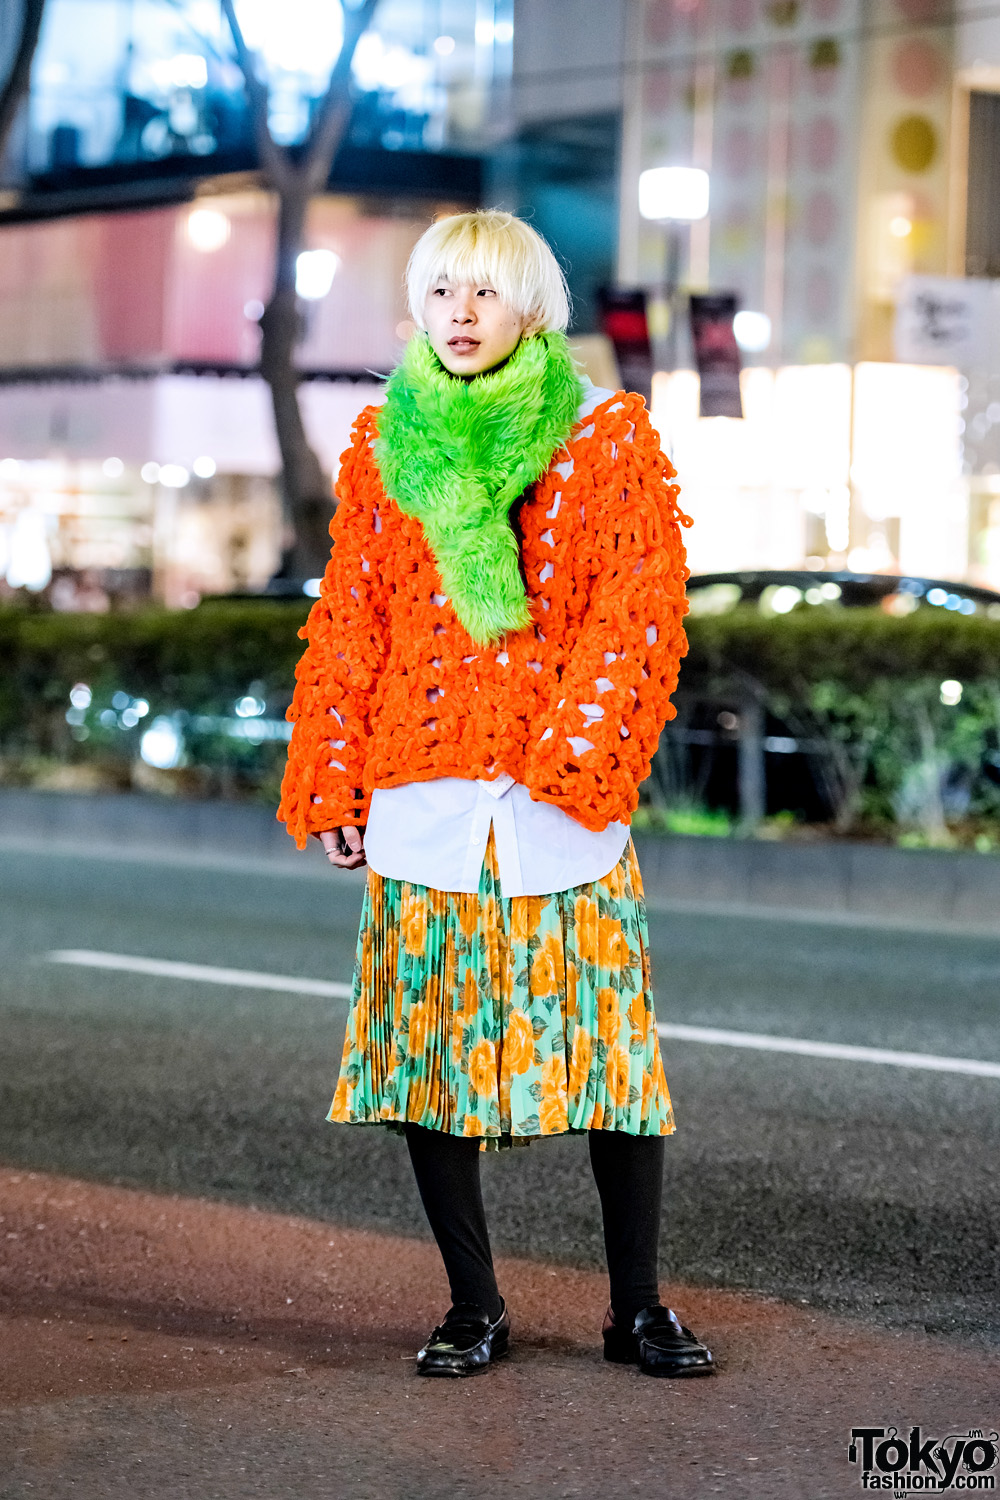 Harajuku Guy in Colorful Eclectic Fashion w/ Dog Harajuku Loose Knit Sweater, Floral Skirt, Haruta Loafers & Fuzzy Muffler